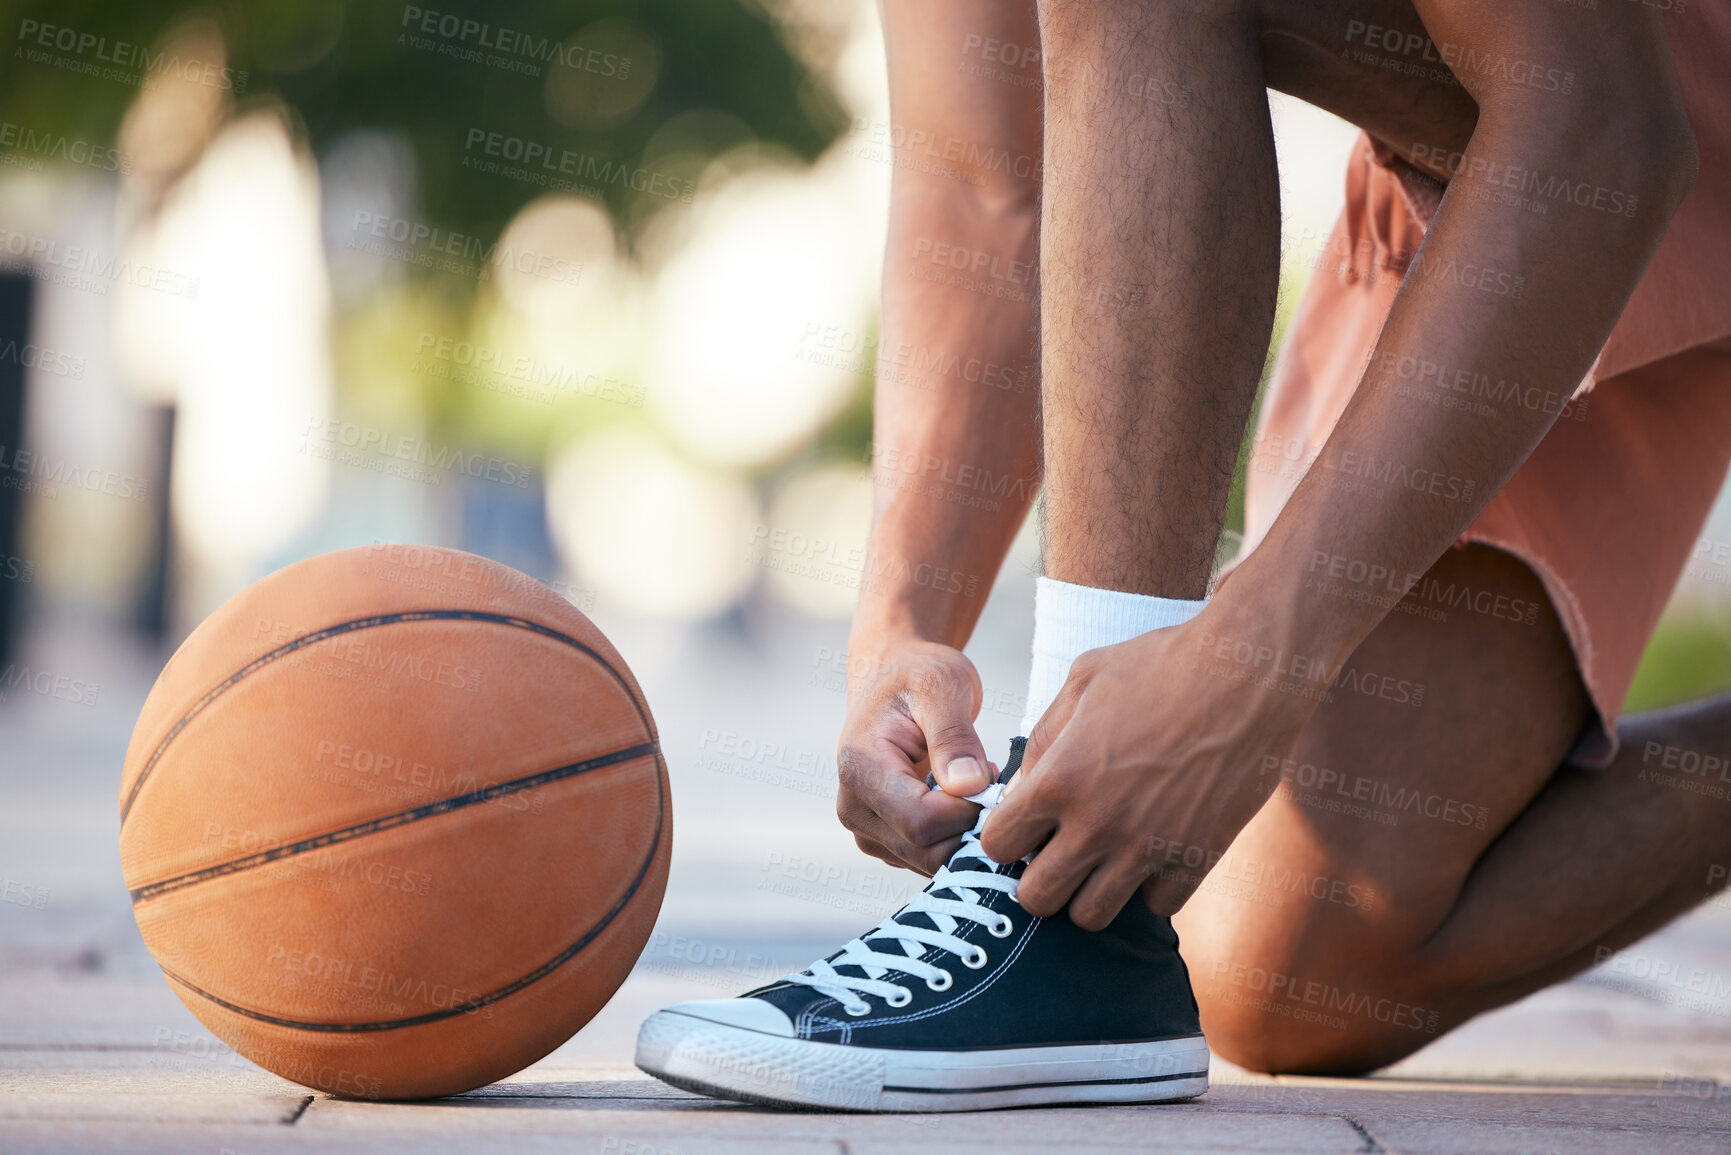 Buy stock photo Hands, shoes and basketball in sports motivation for exercise, workout and exercise in the outdoors. Hand of sport player tying lace for ball game, match or training in healthy cardio fitness outside